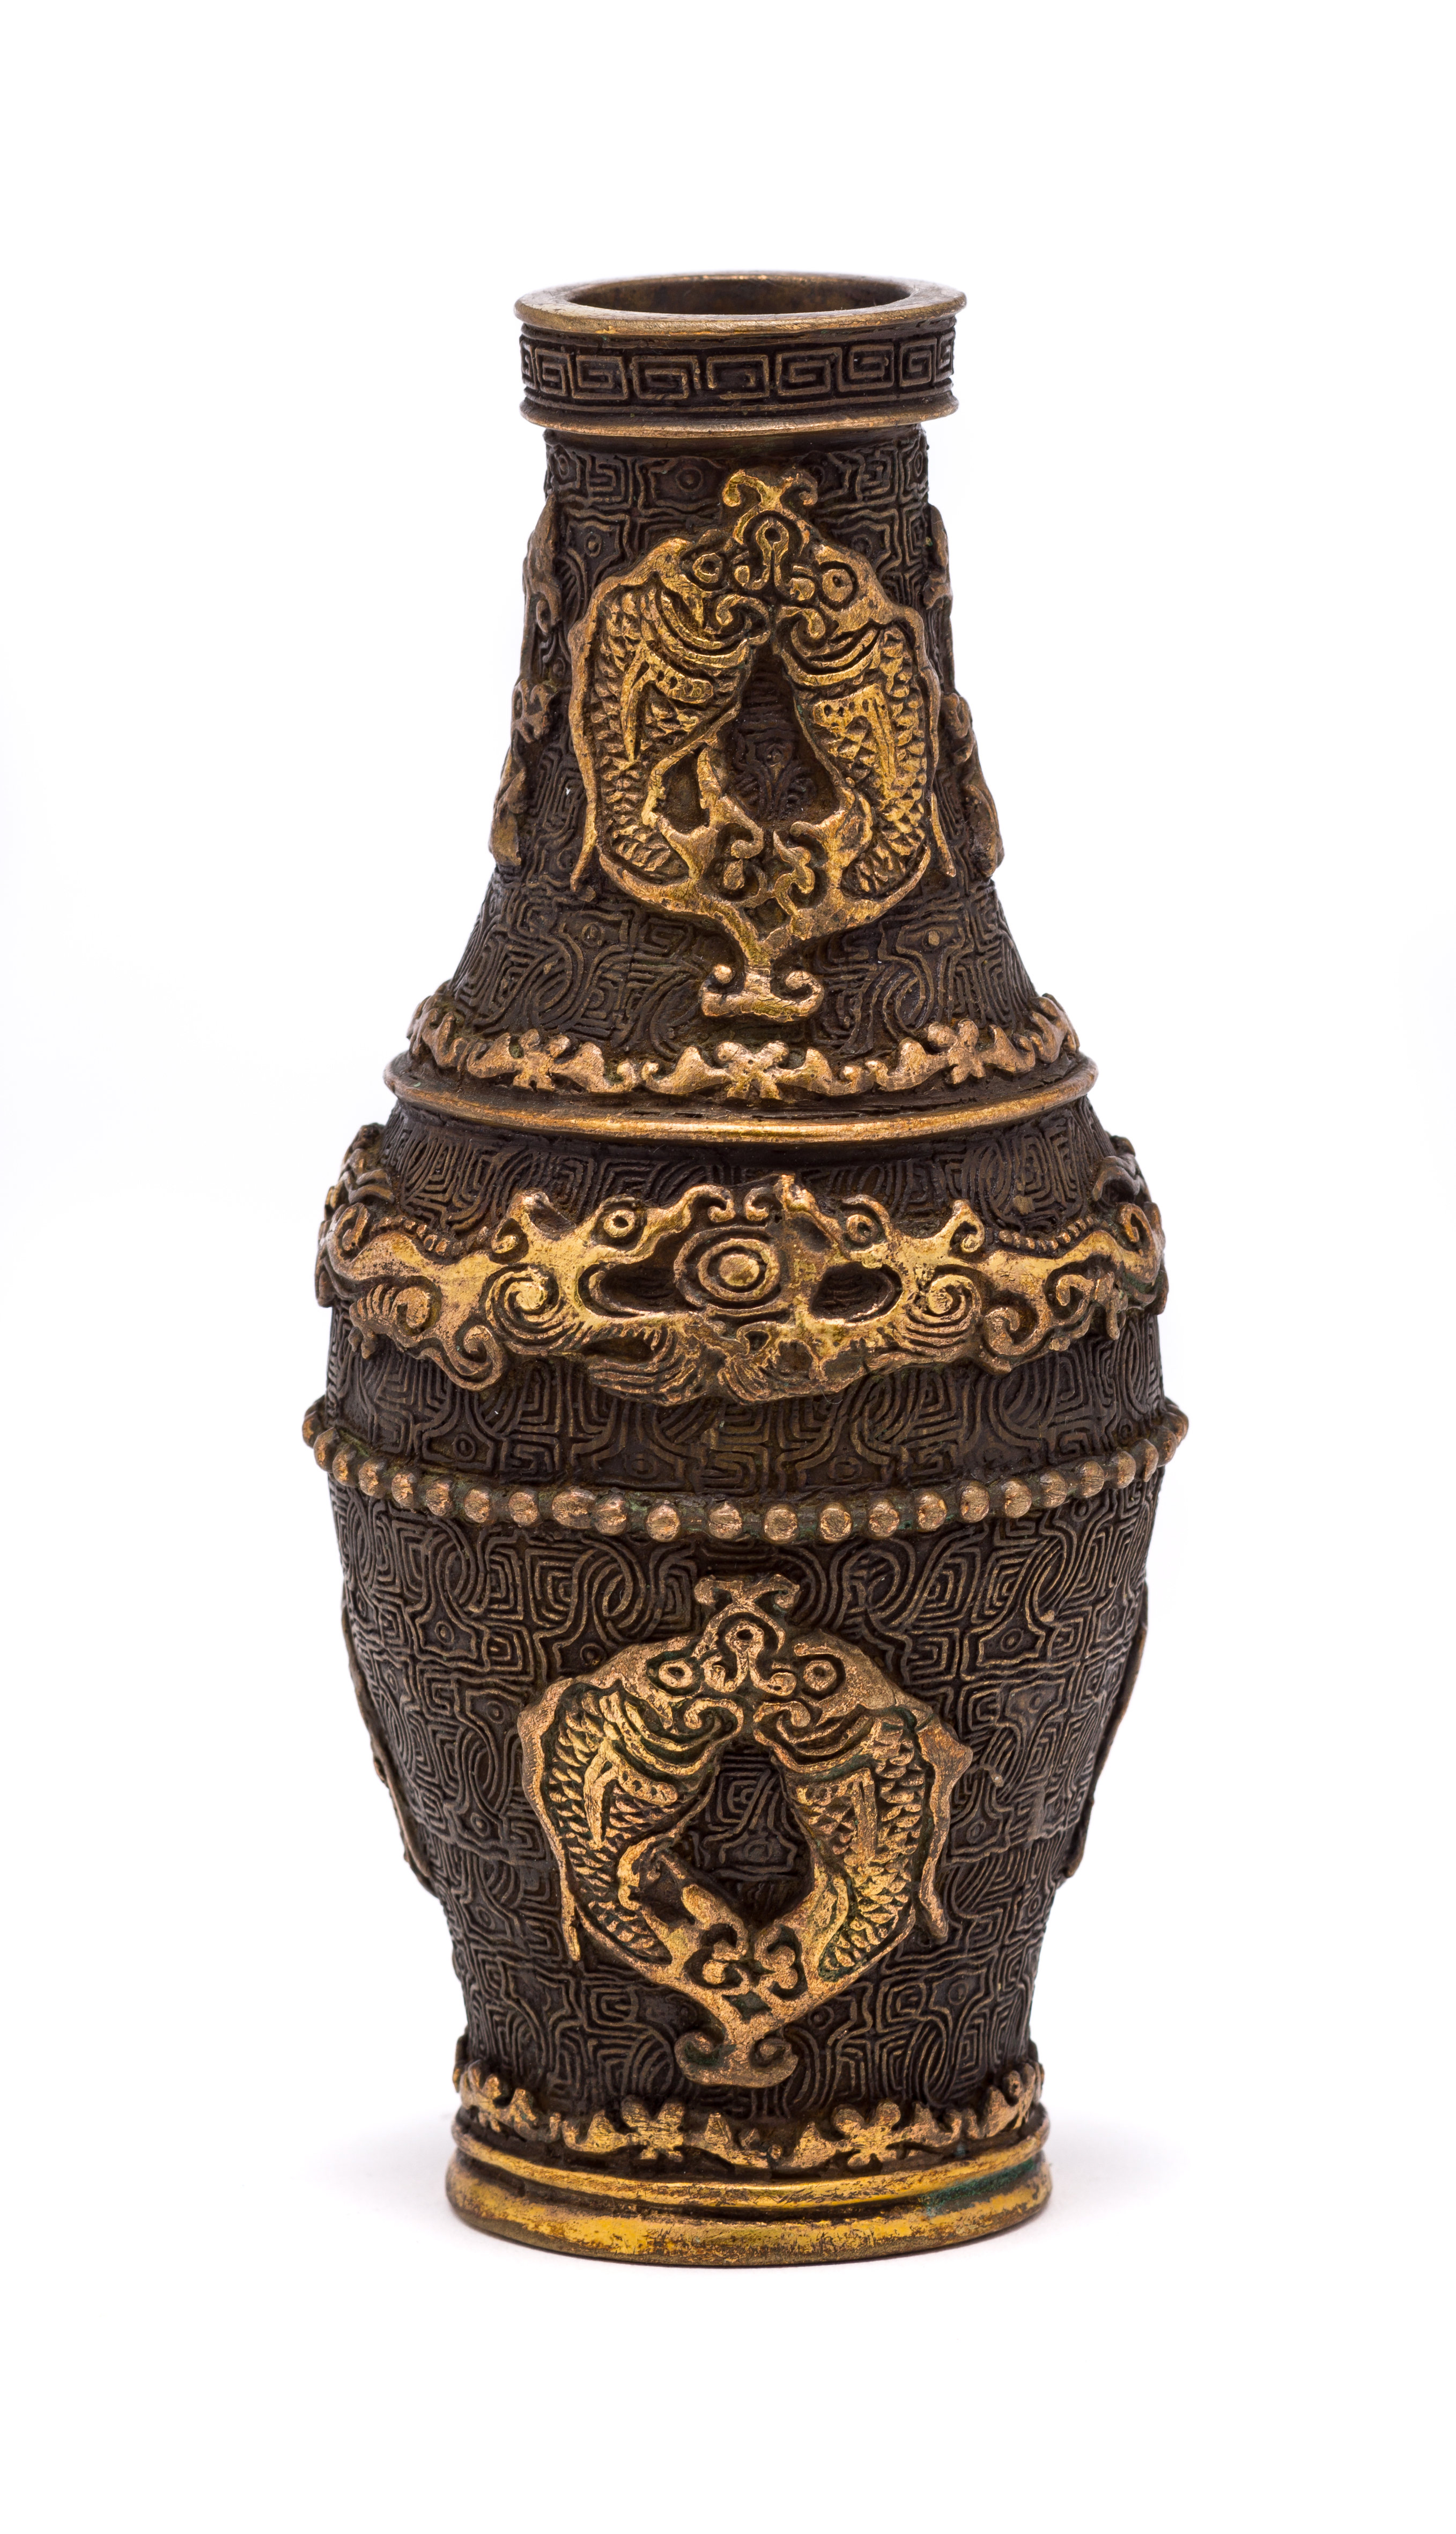 A SMALL CHINESE PARCEL-GILT BRONZE BOTTLE VASE